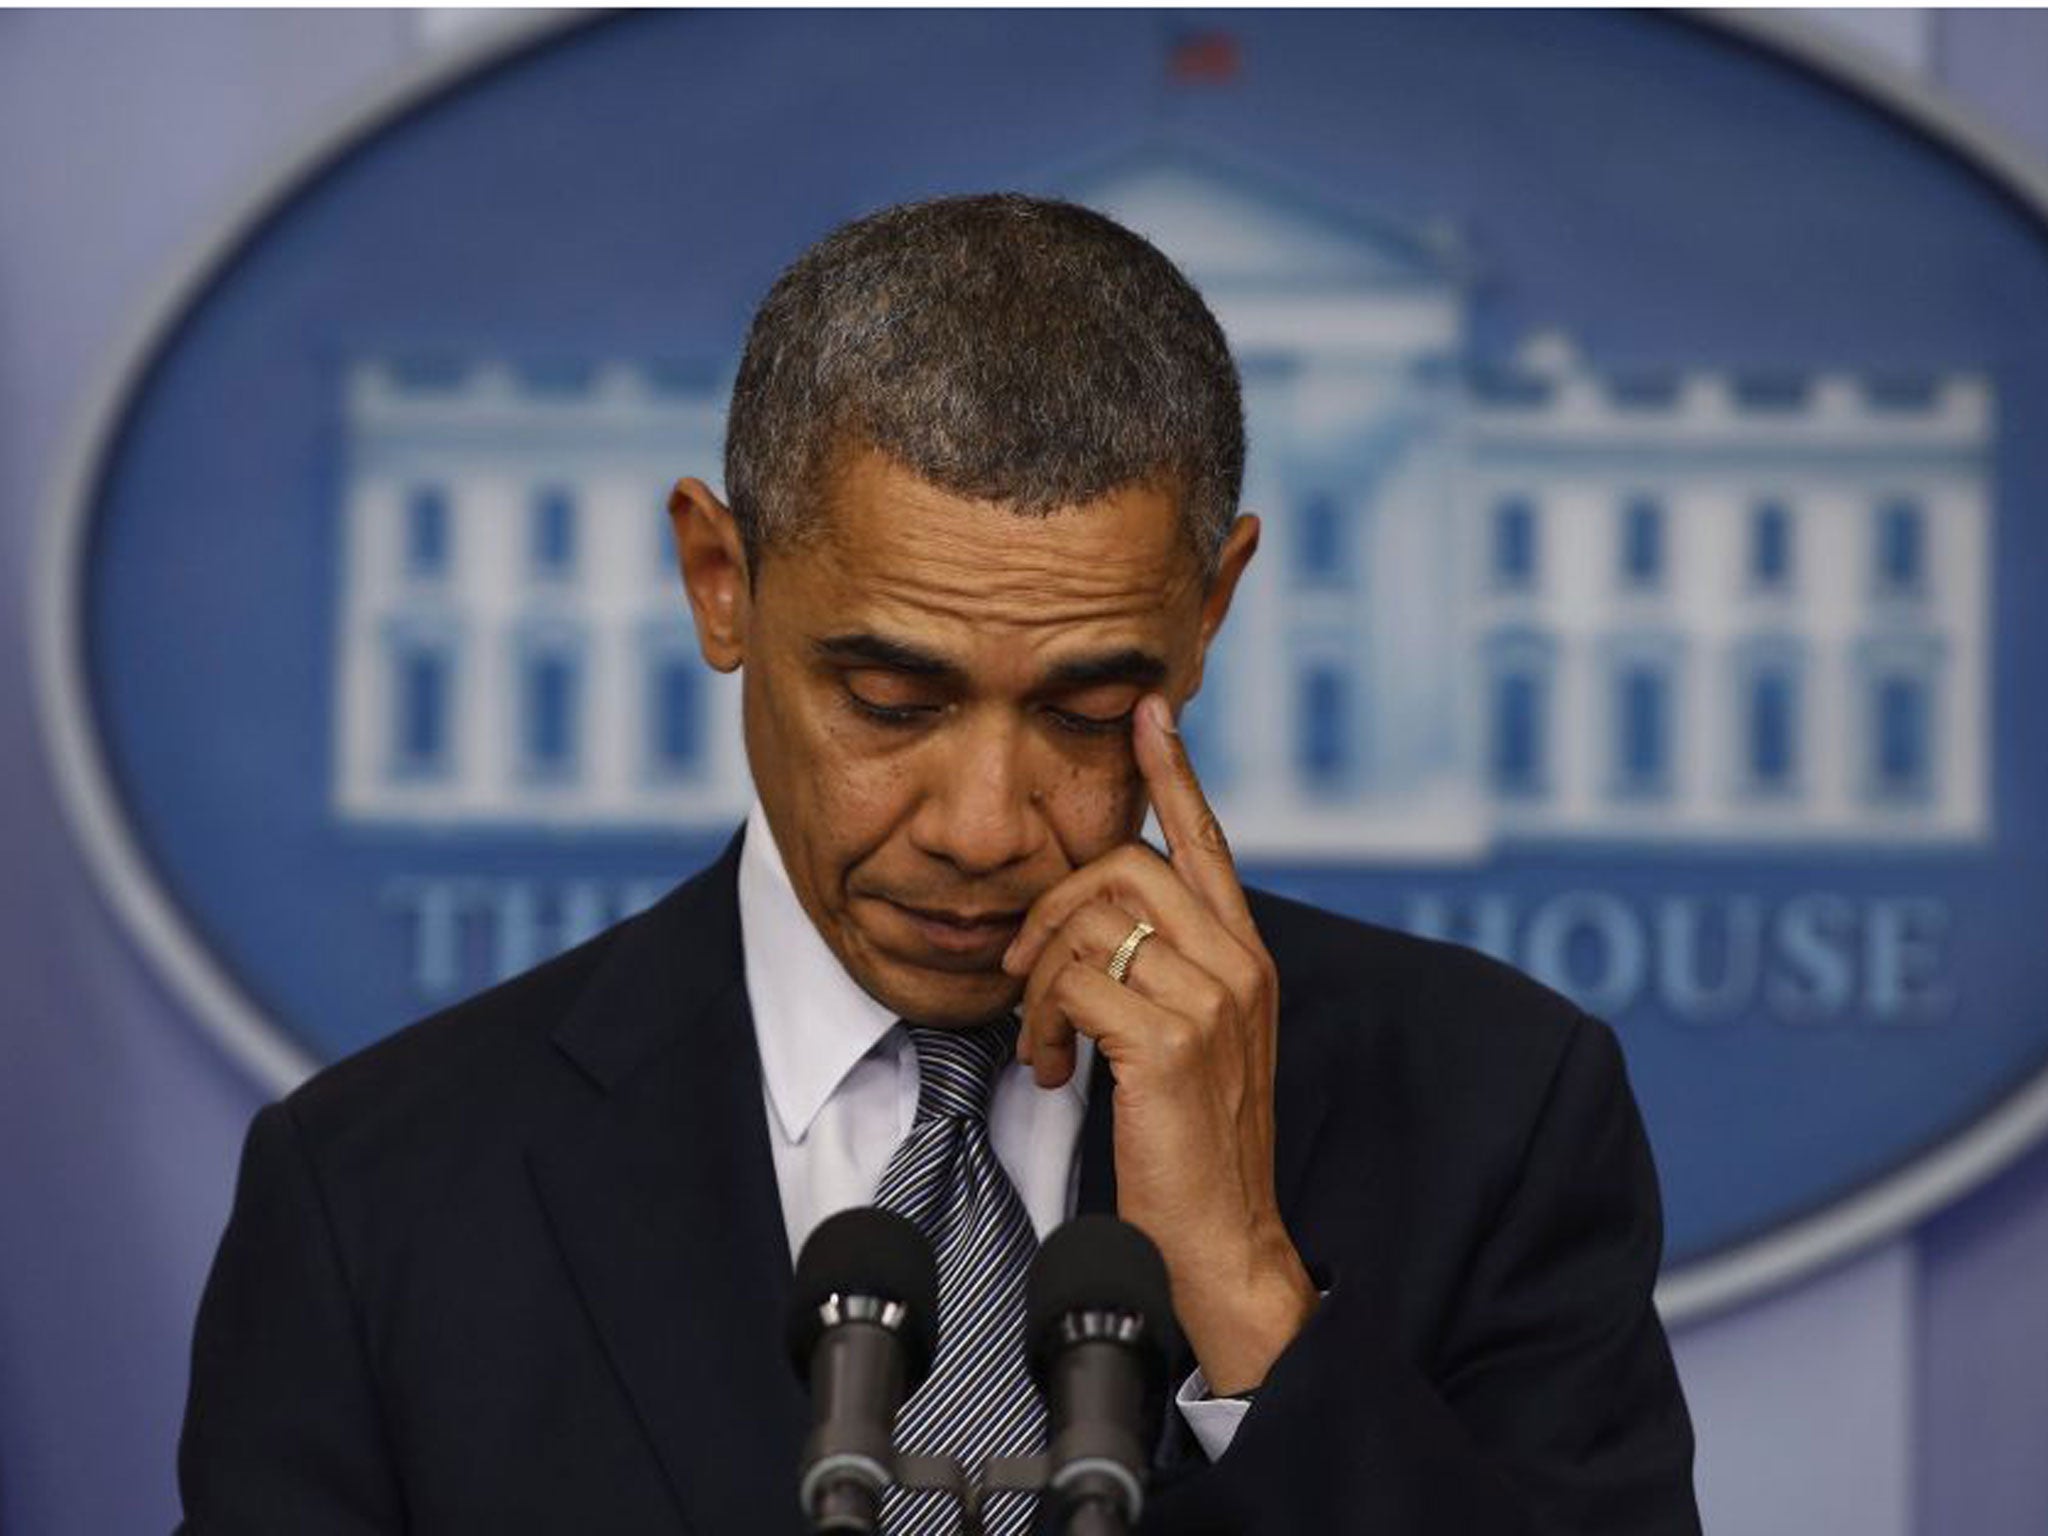 Obama wipes away a tear during the press conference